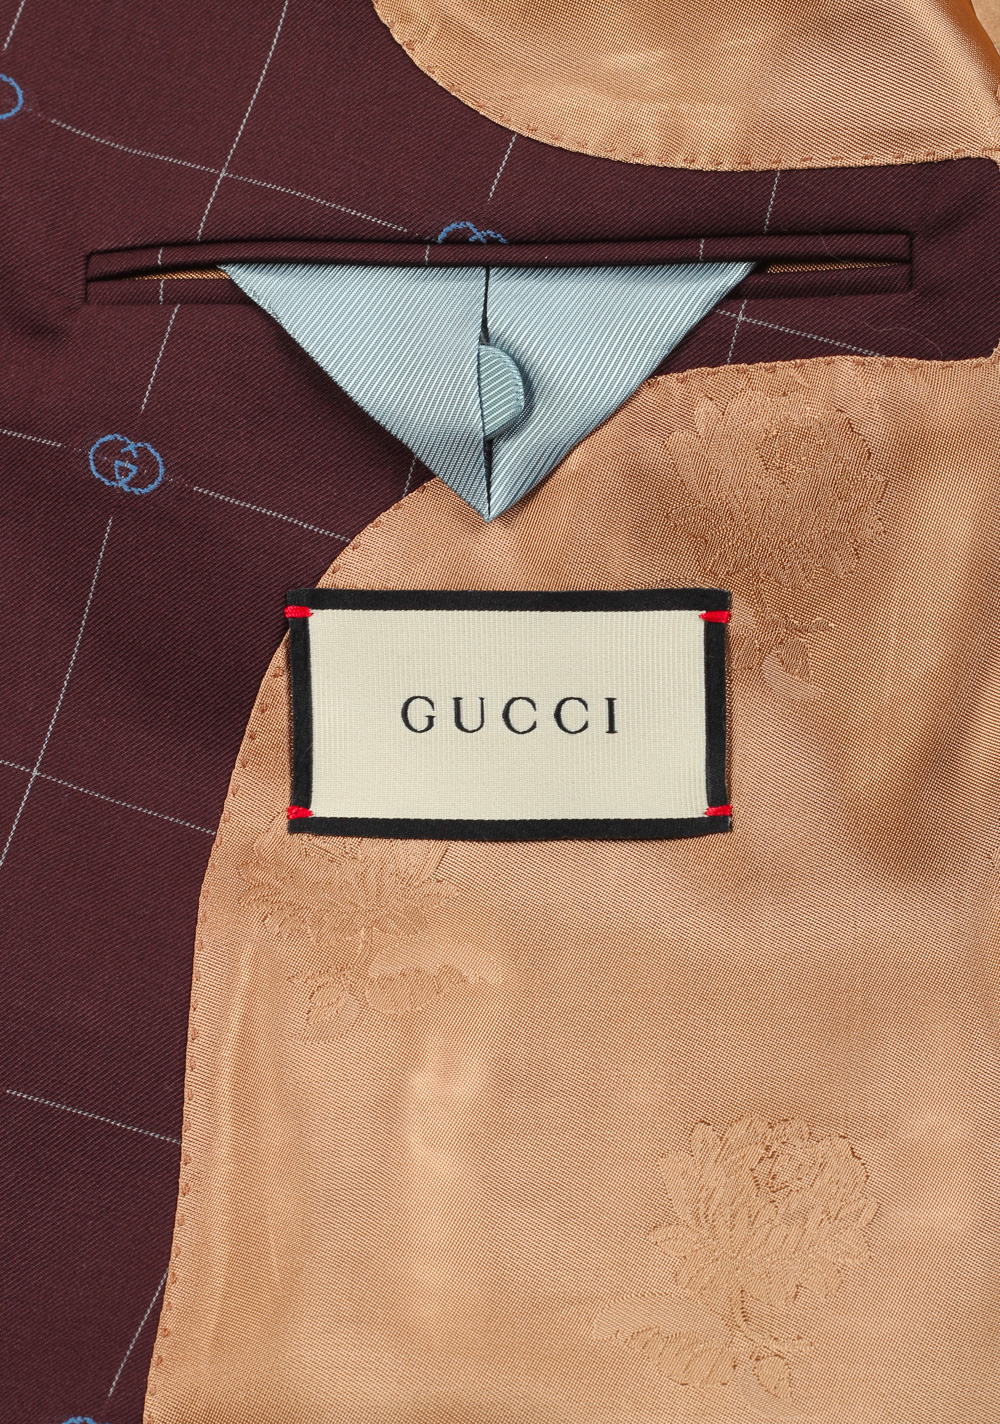 Gucci Burgundy Double Breasted Sport Coat Size 52 / 42R U.S. | Costume Limité